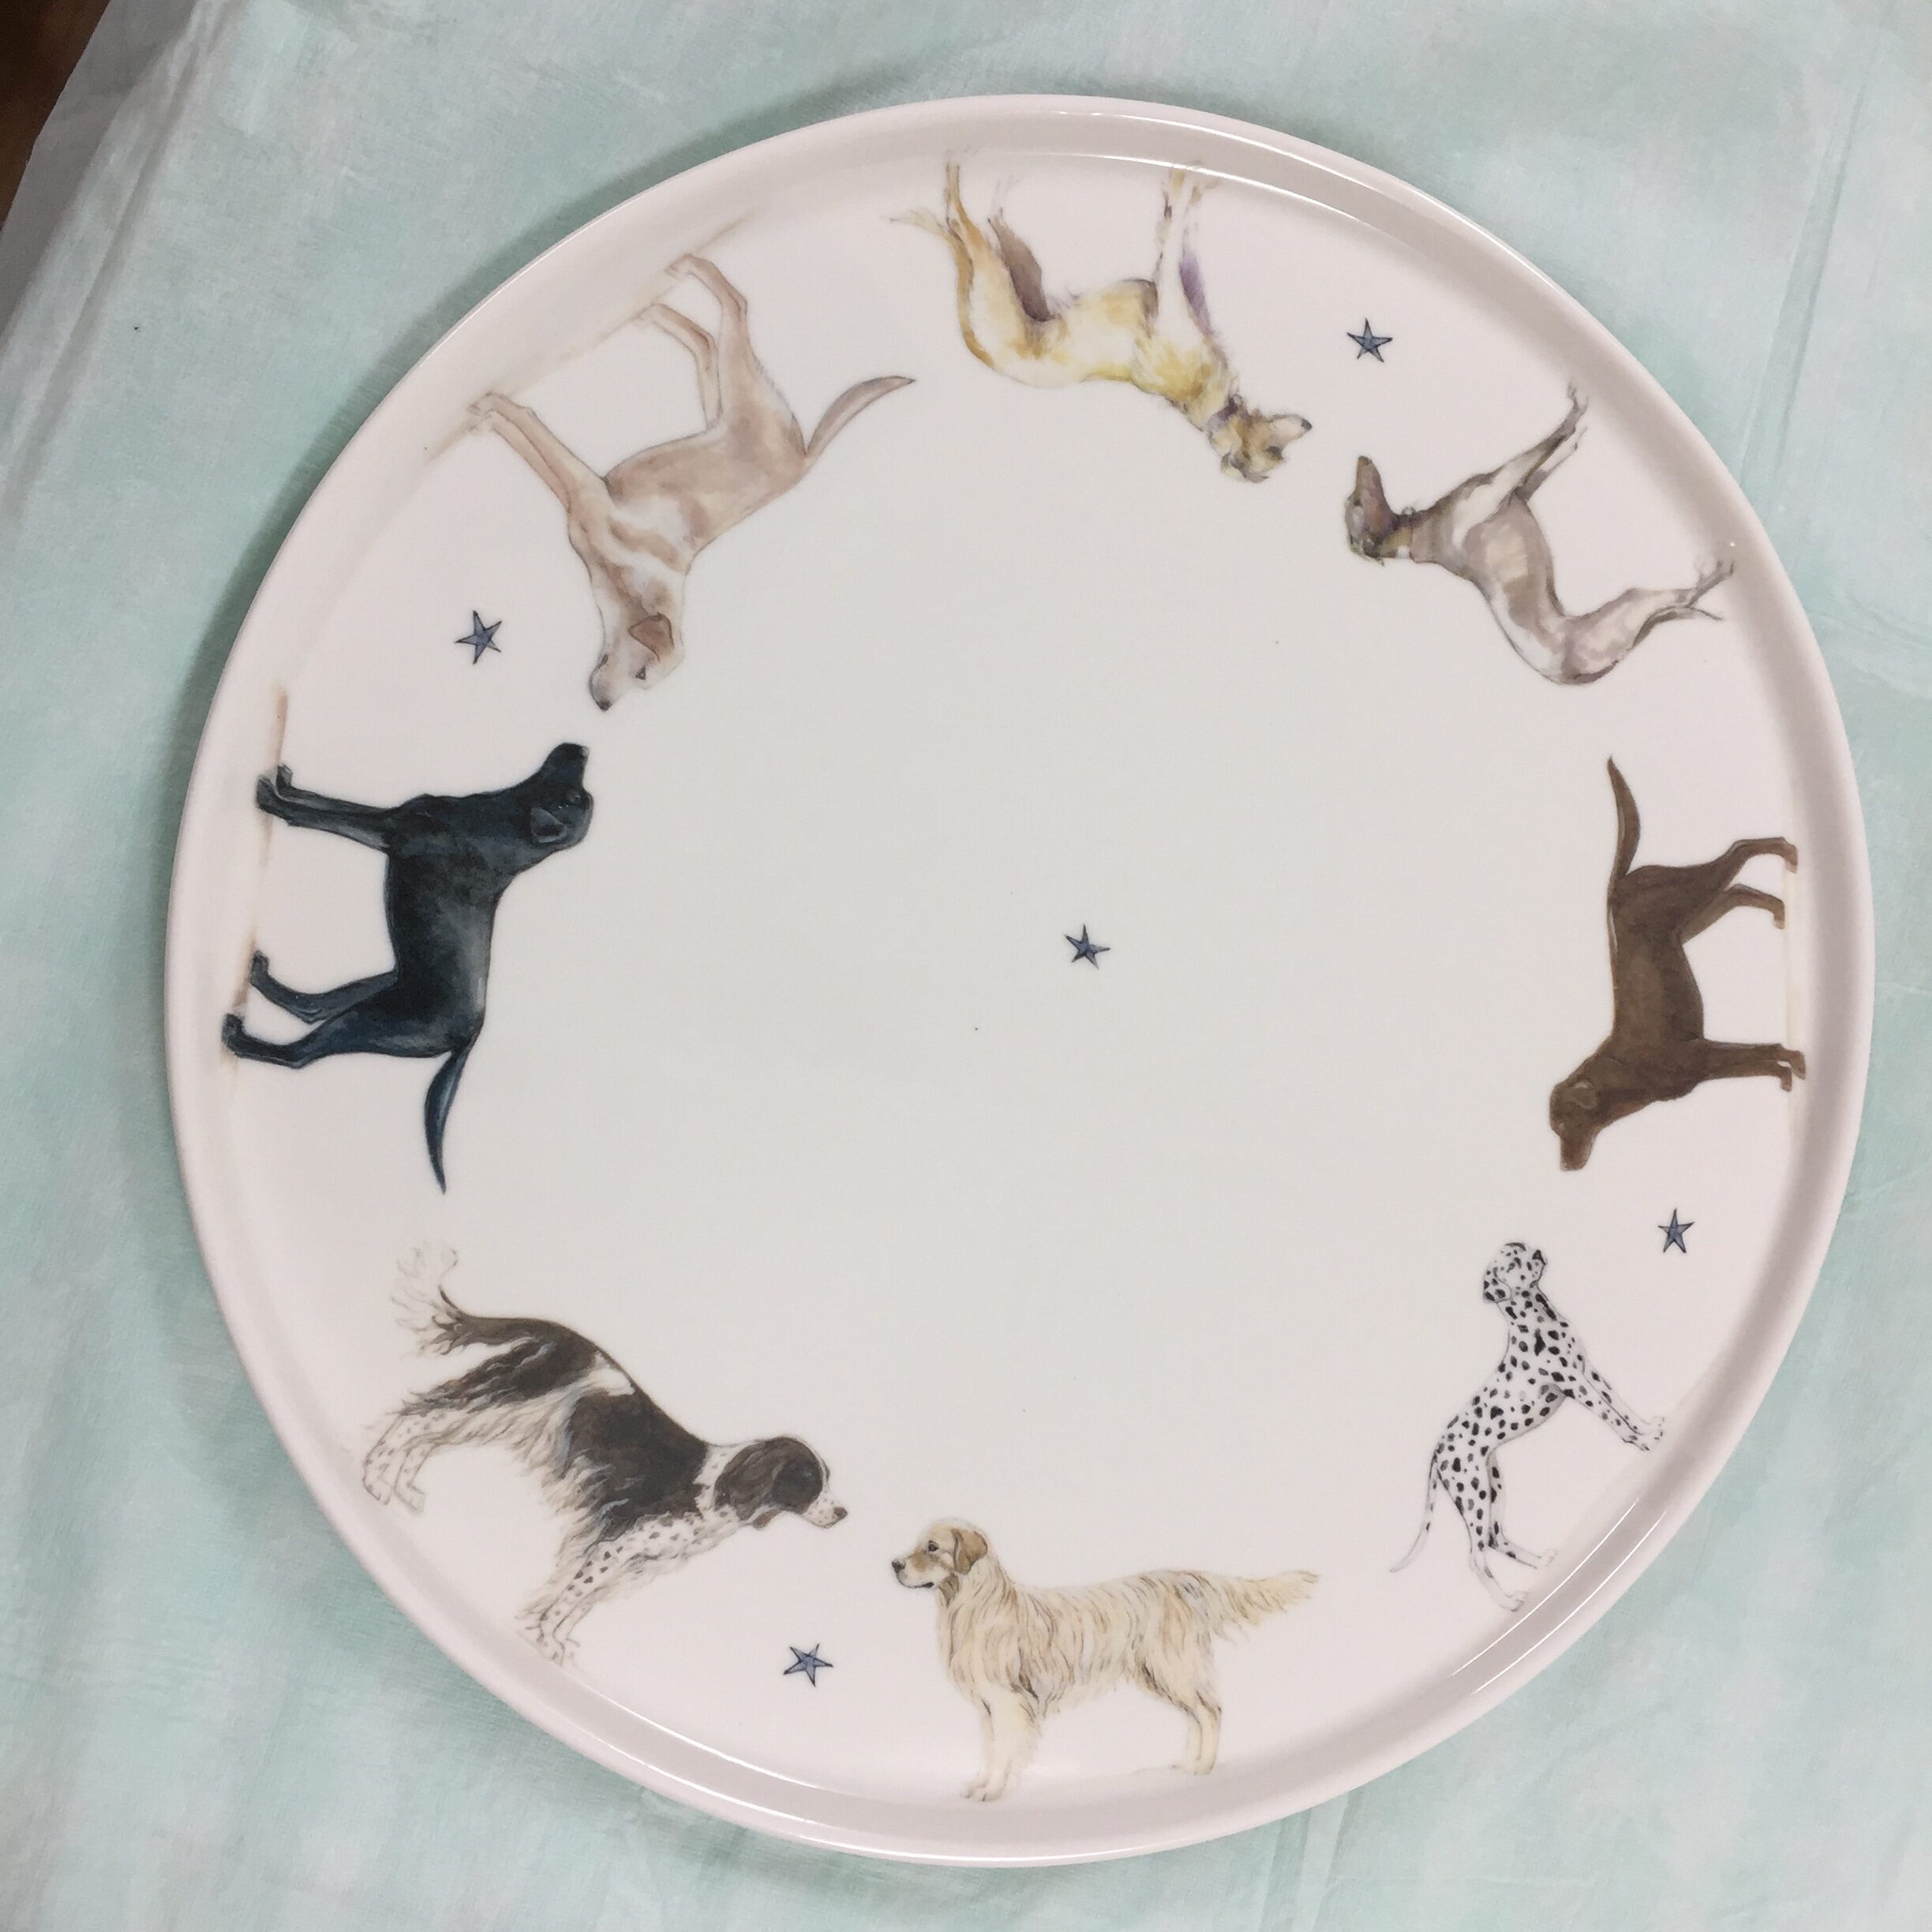 A Mixture of our breeds on a Large Cake Plate